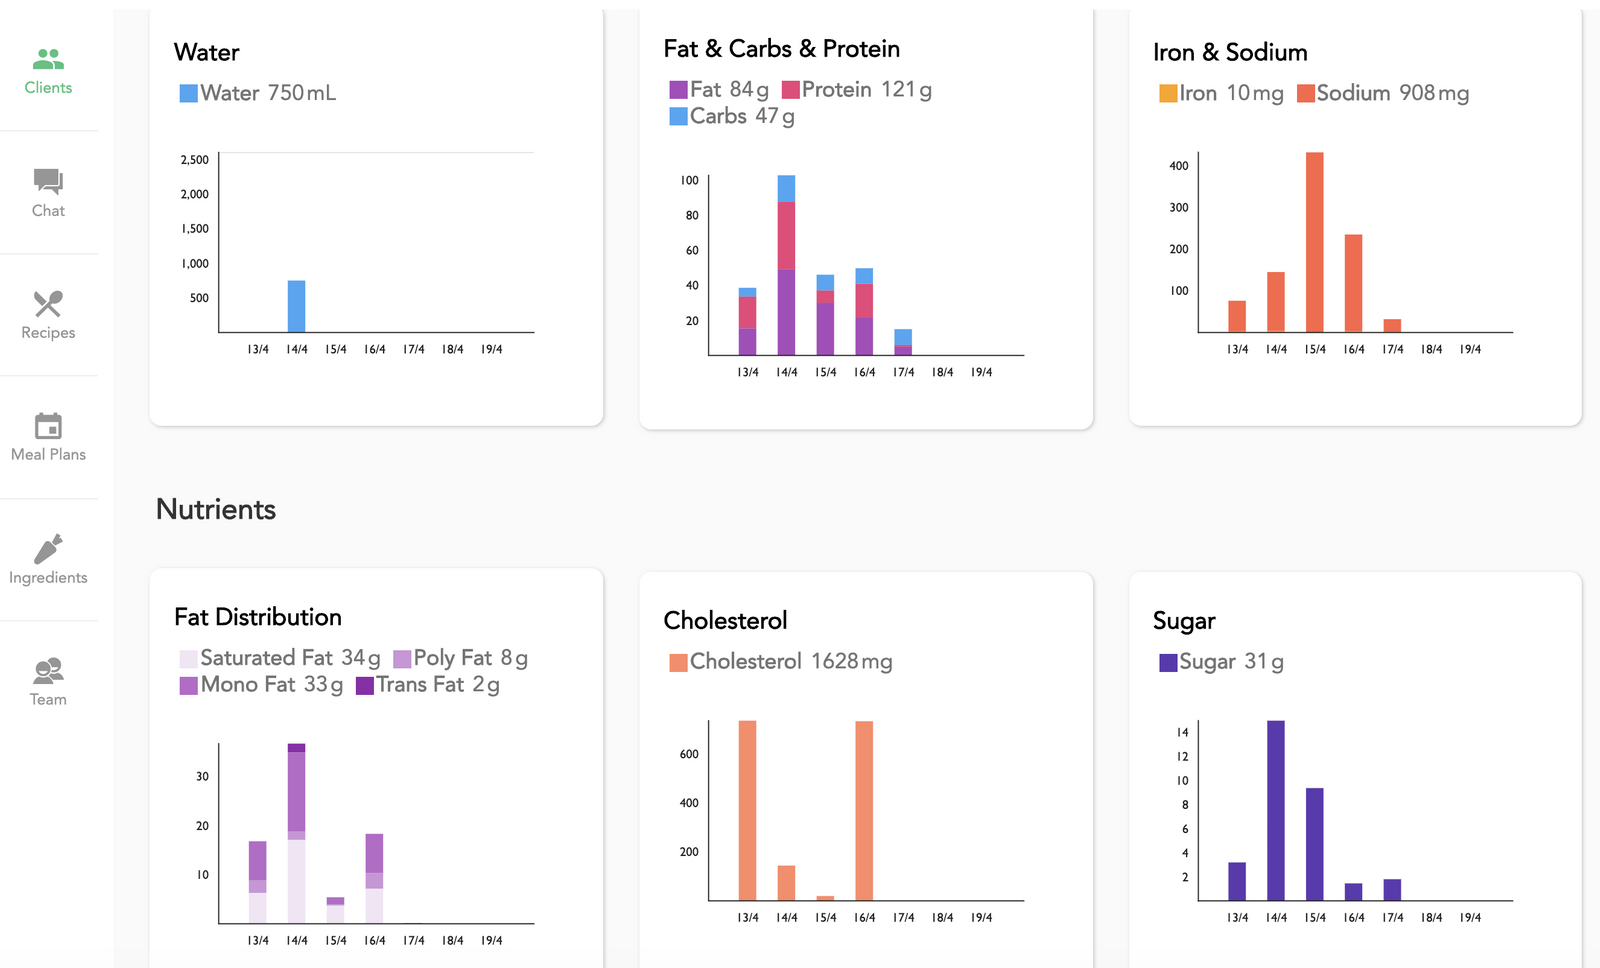 Beautiful detailed nutrition data about your clients